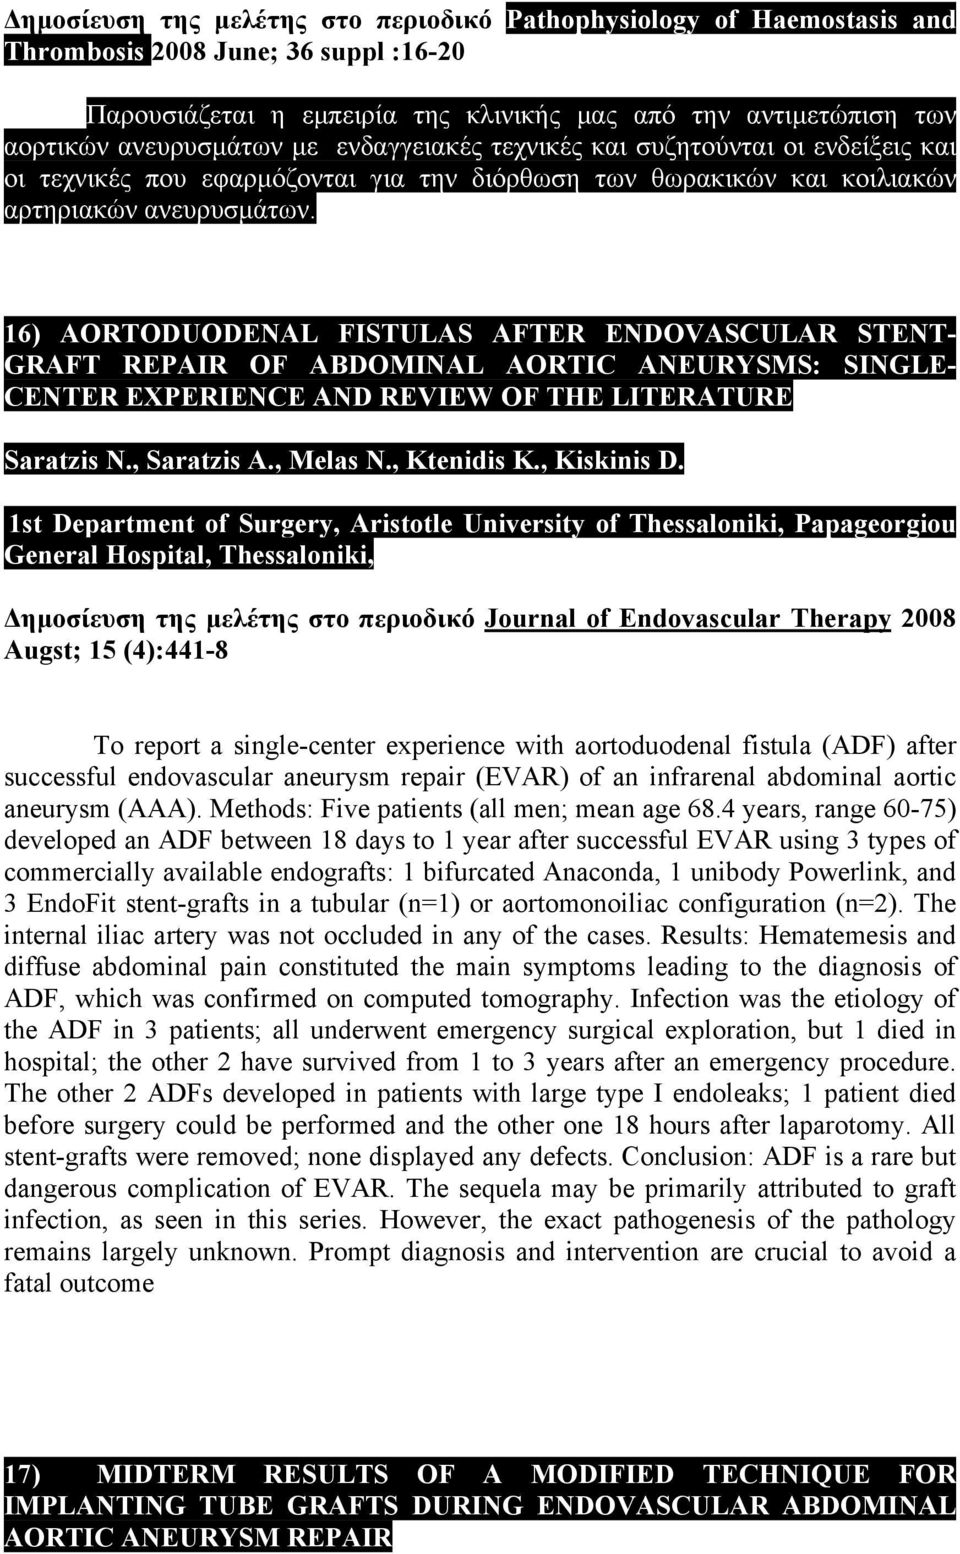 16) AORTODUODENAL FISTULAS AFTER ENDOVASCULAR STENT- GRAFT REPAIR OF ABDOMINAL AORTIC ANEURYSMS: SINGLE- CENTER EXPERIENCE AND REVIEW OF THE LITERATURE Saratzis Ν., Saratzis A., Melas N., Ktenidis K.